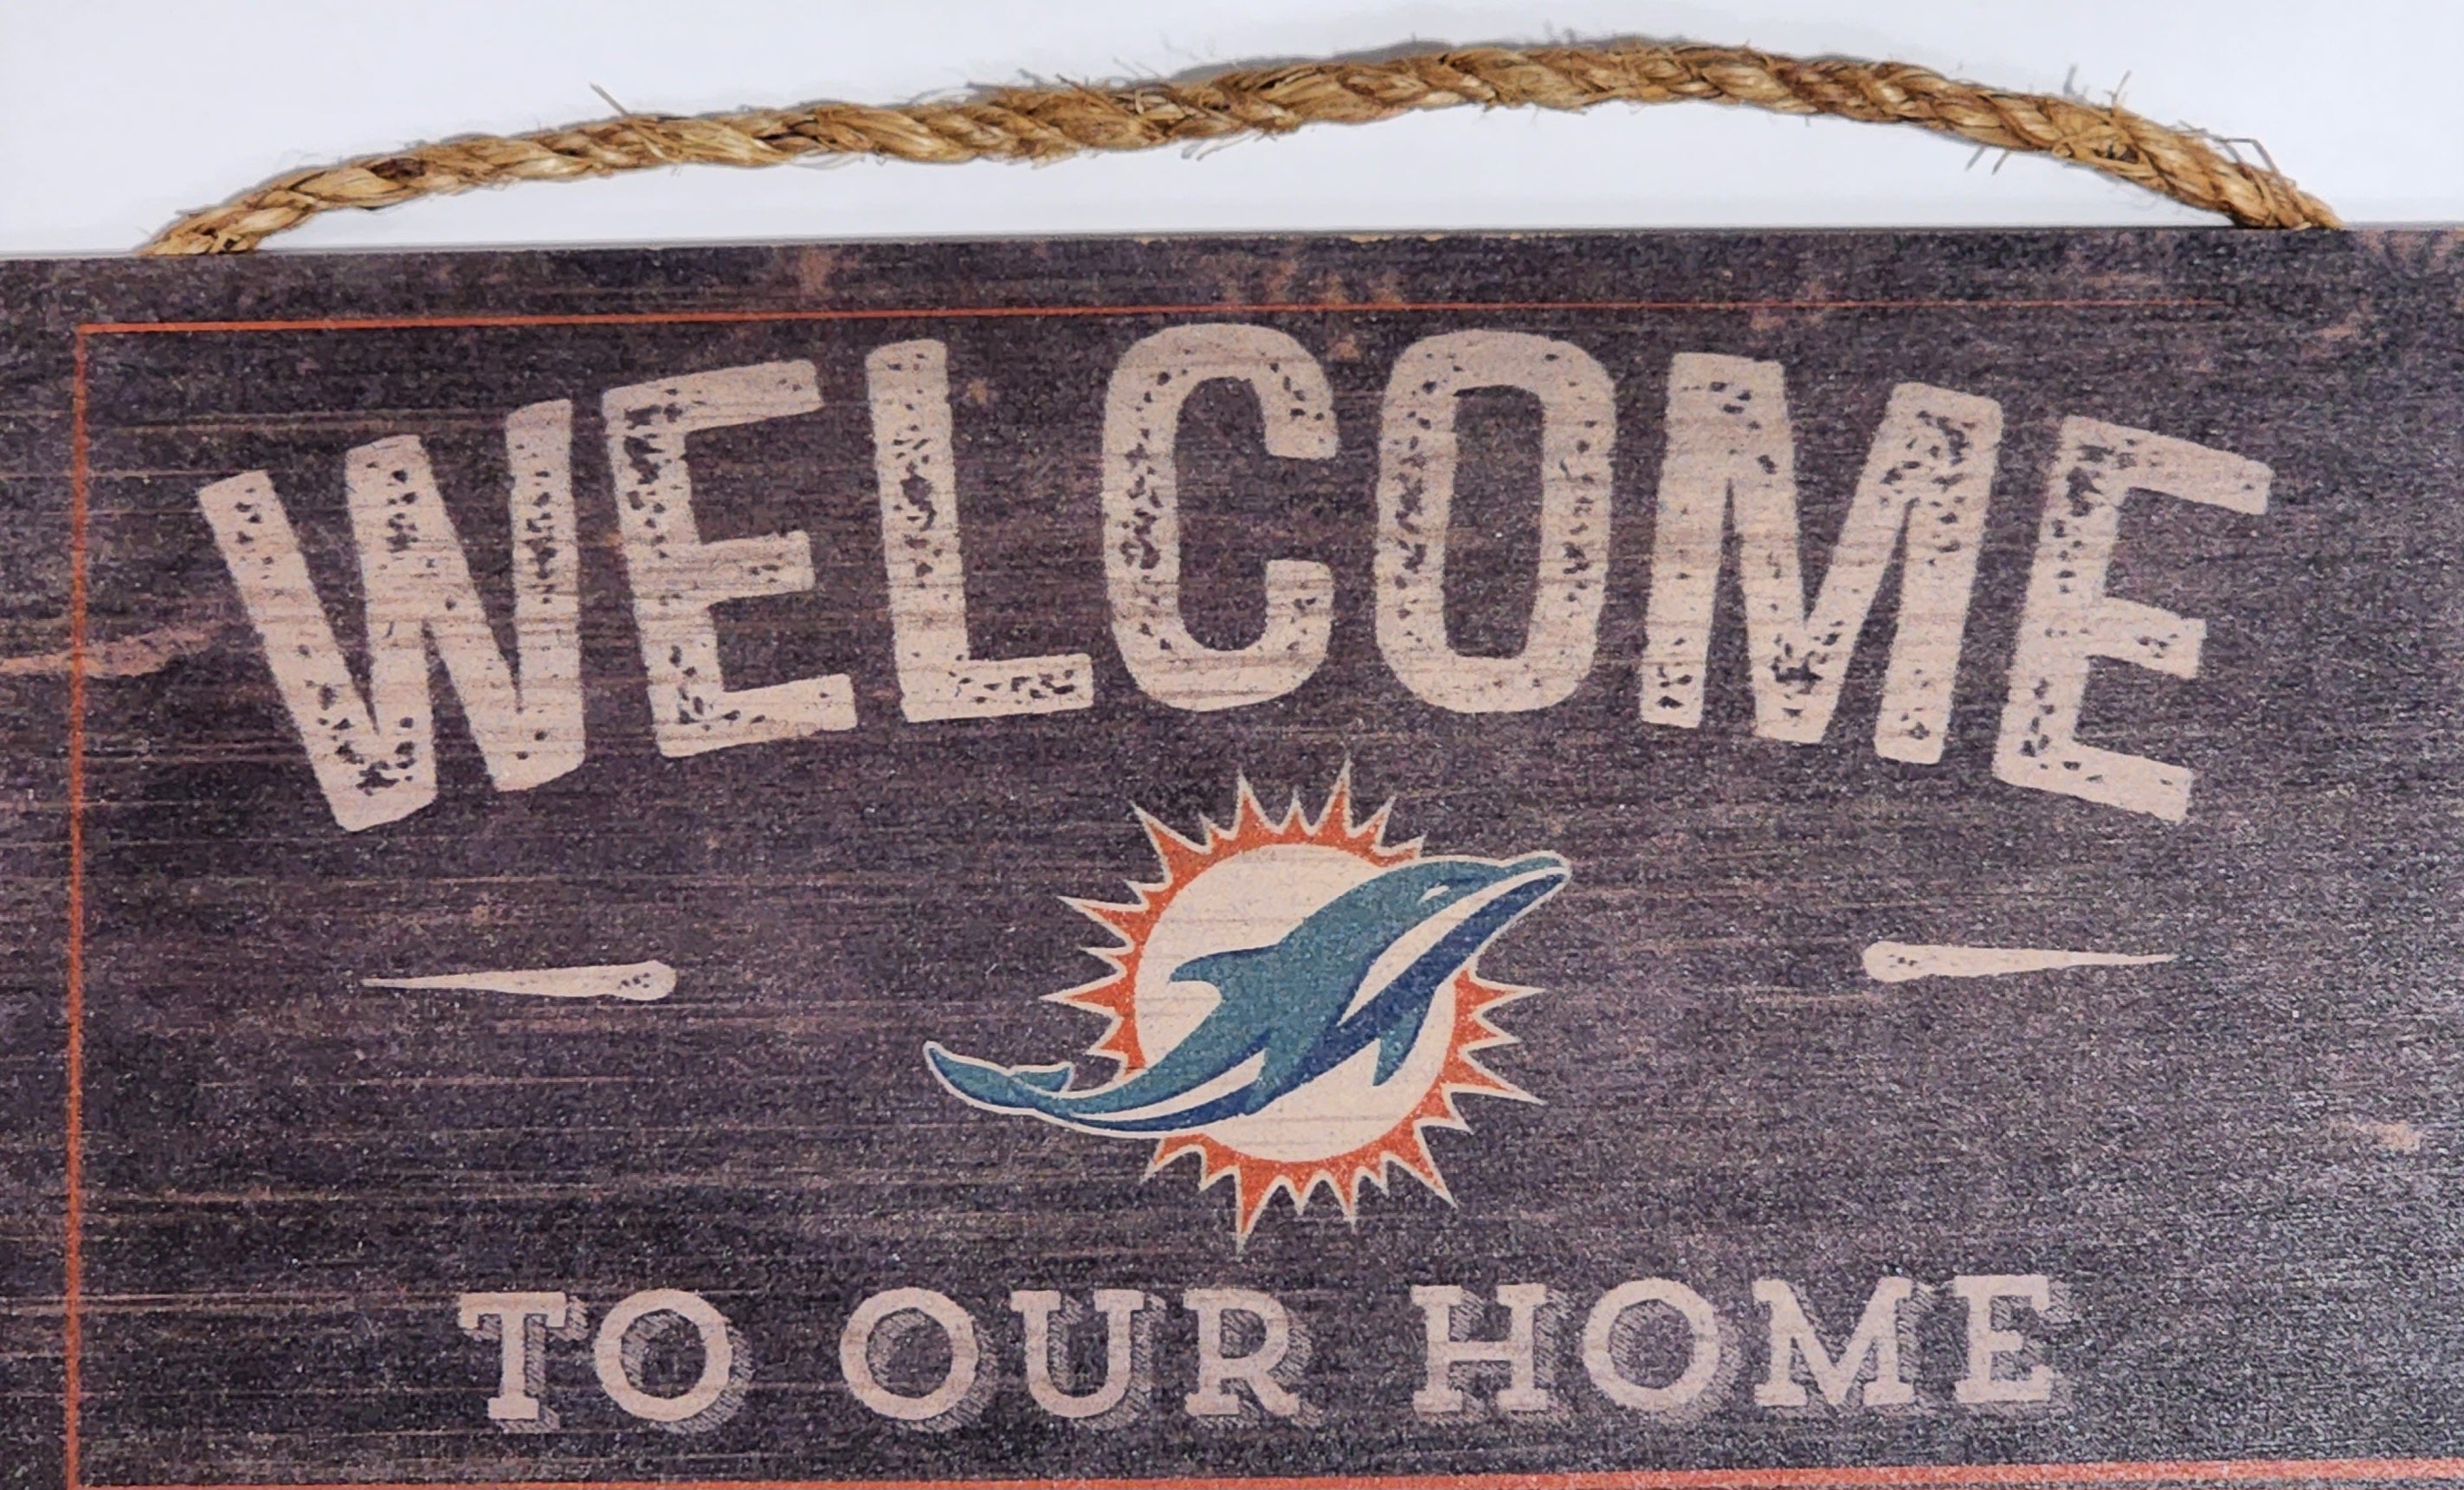 Miami Dolphins Fans Welcome to our Home Wood Sign - 6 x 12